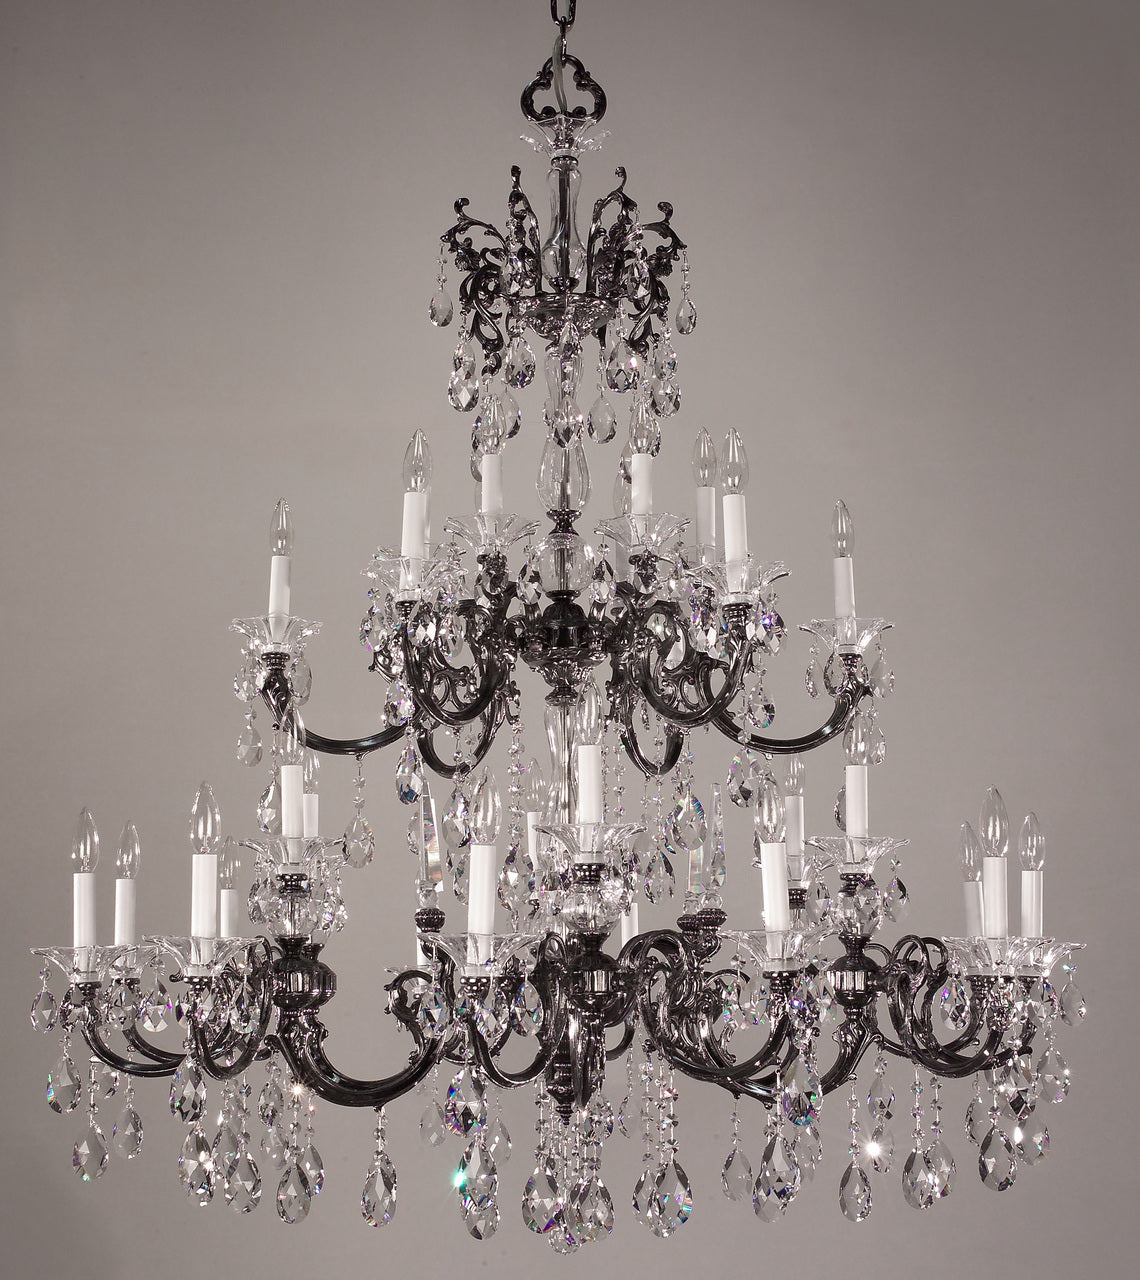 Classic Lighting 57060 EP SC Via Lombardi Crystal Chandelier in Ebony Pearl (Imported from Spain)